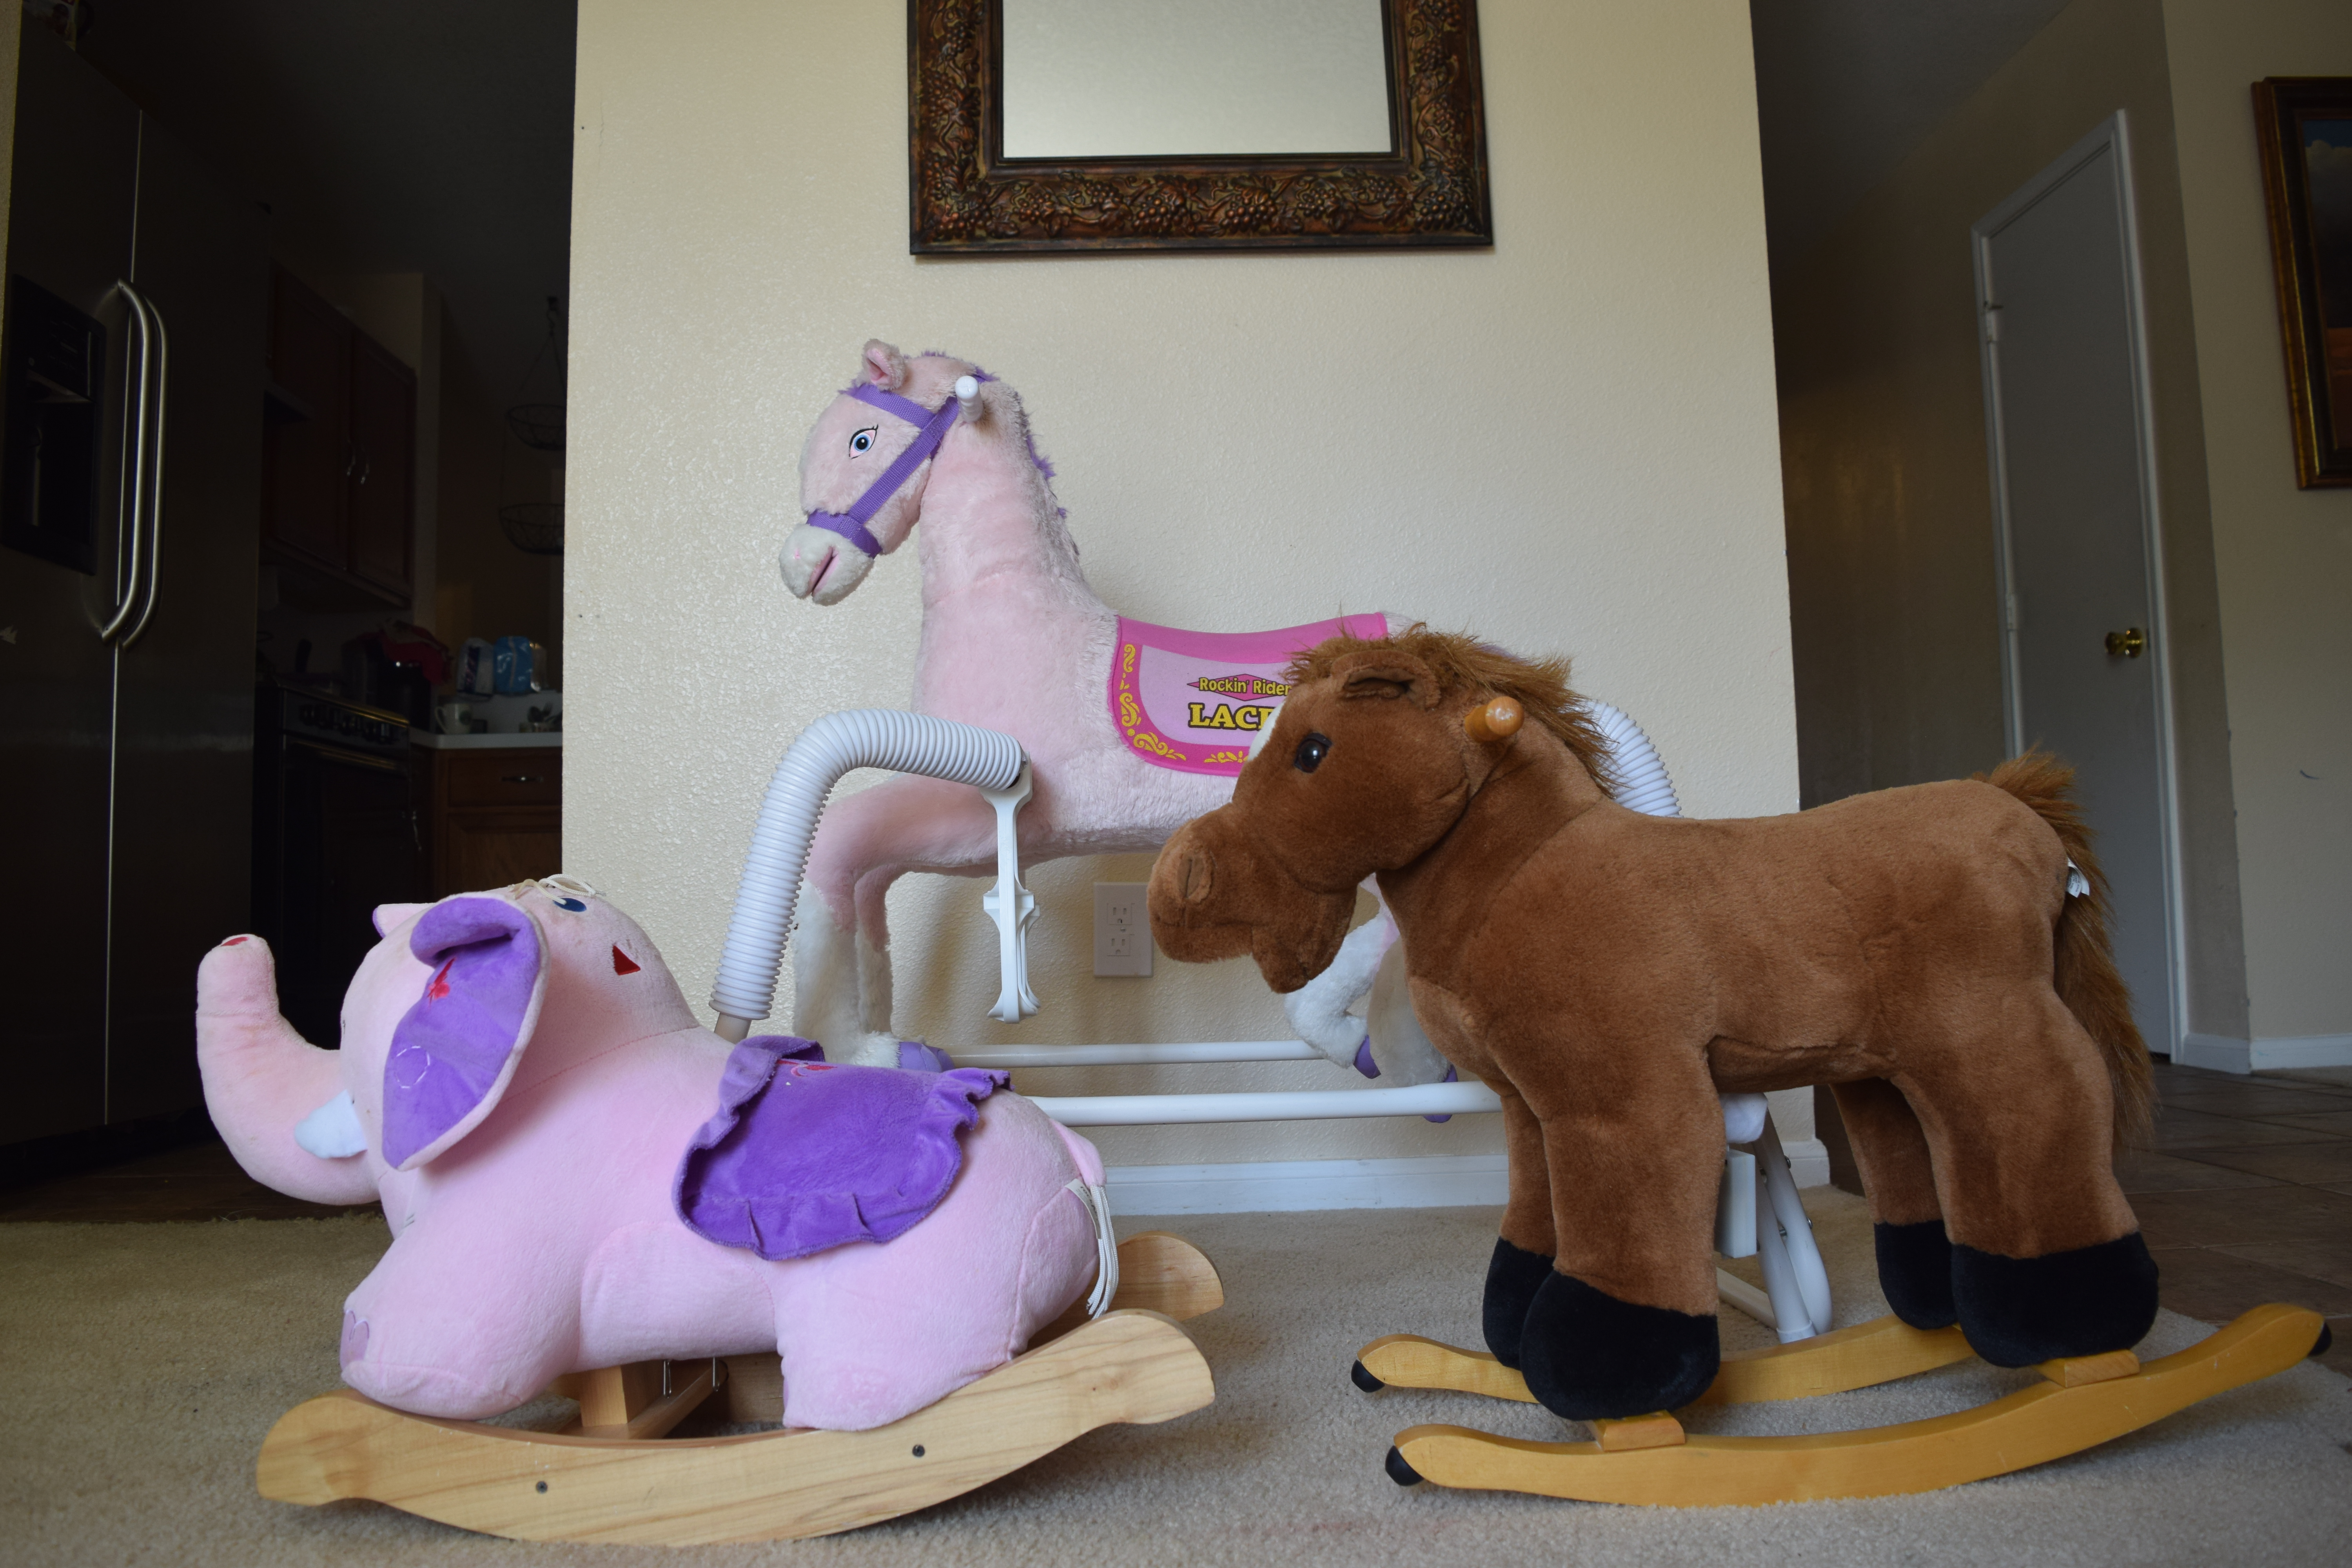 Compare Rockin Rider Lacey spring horse size to regular rocking horses